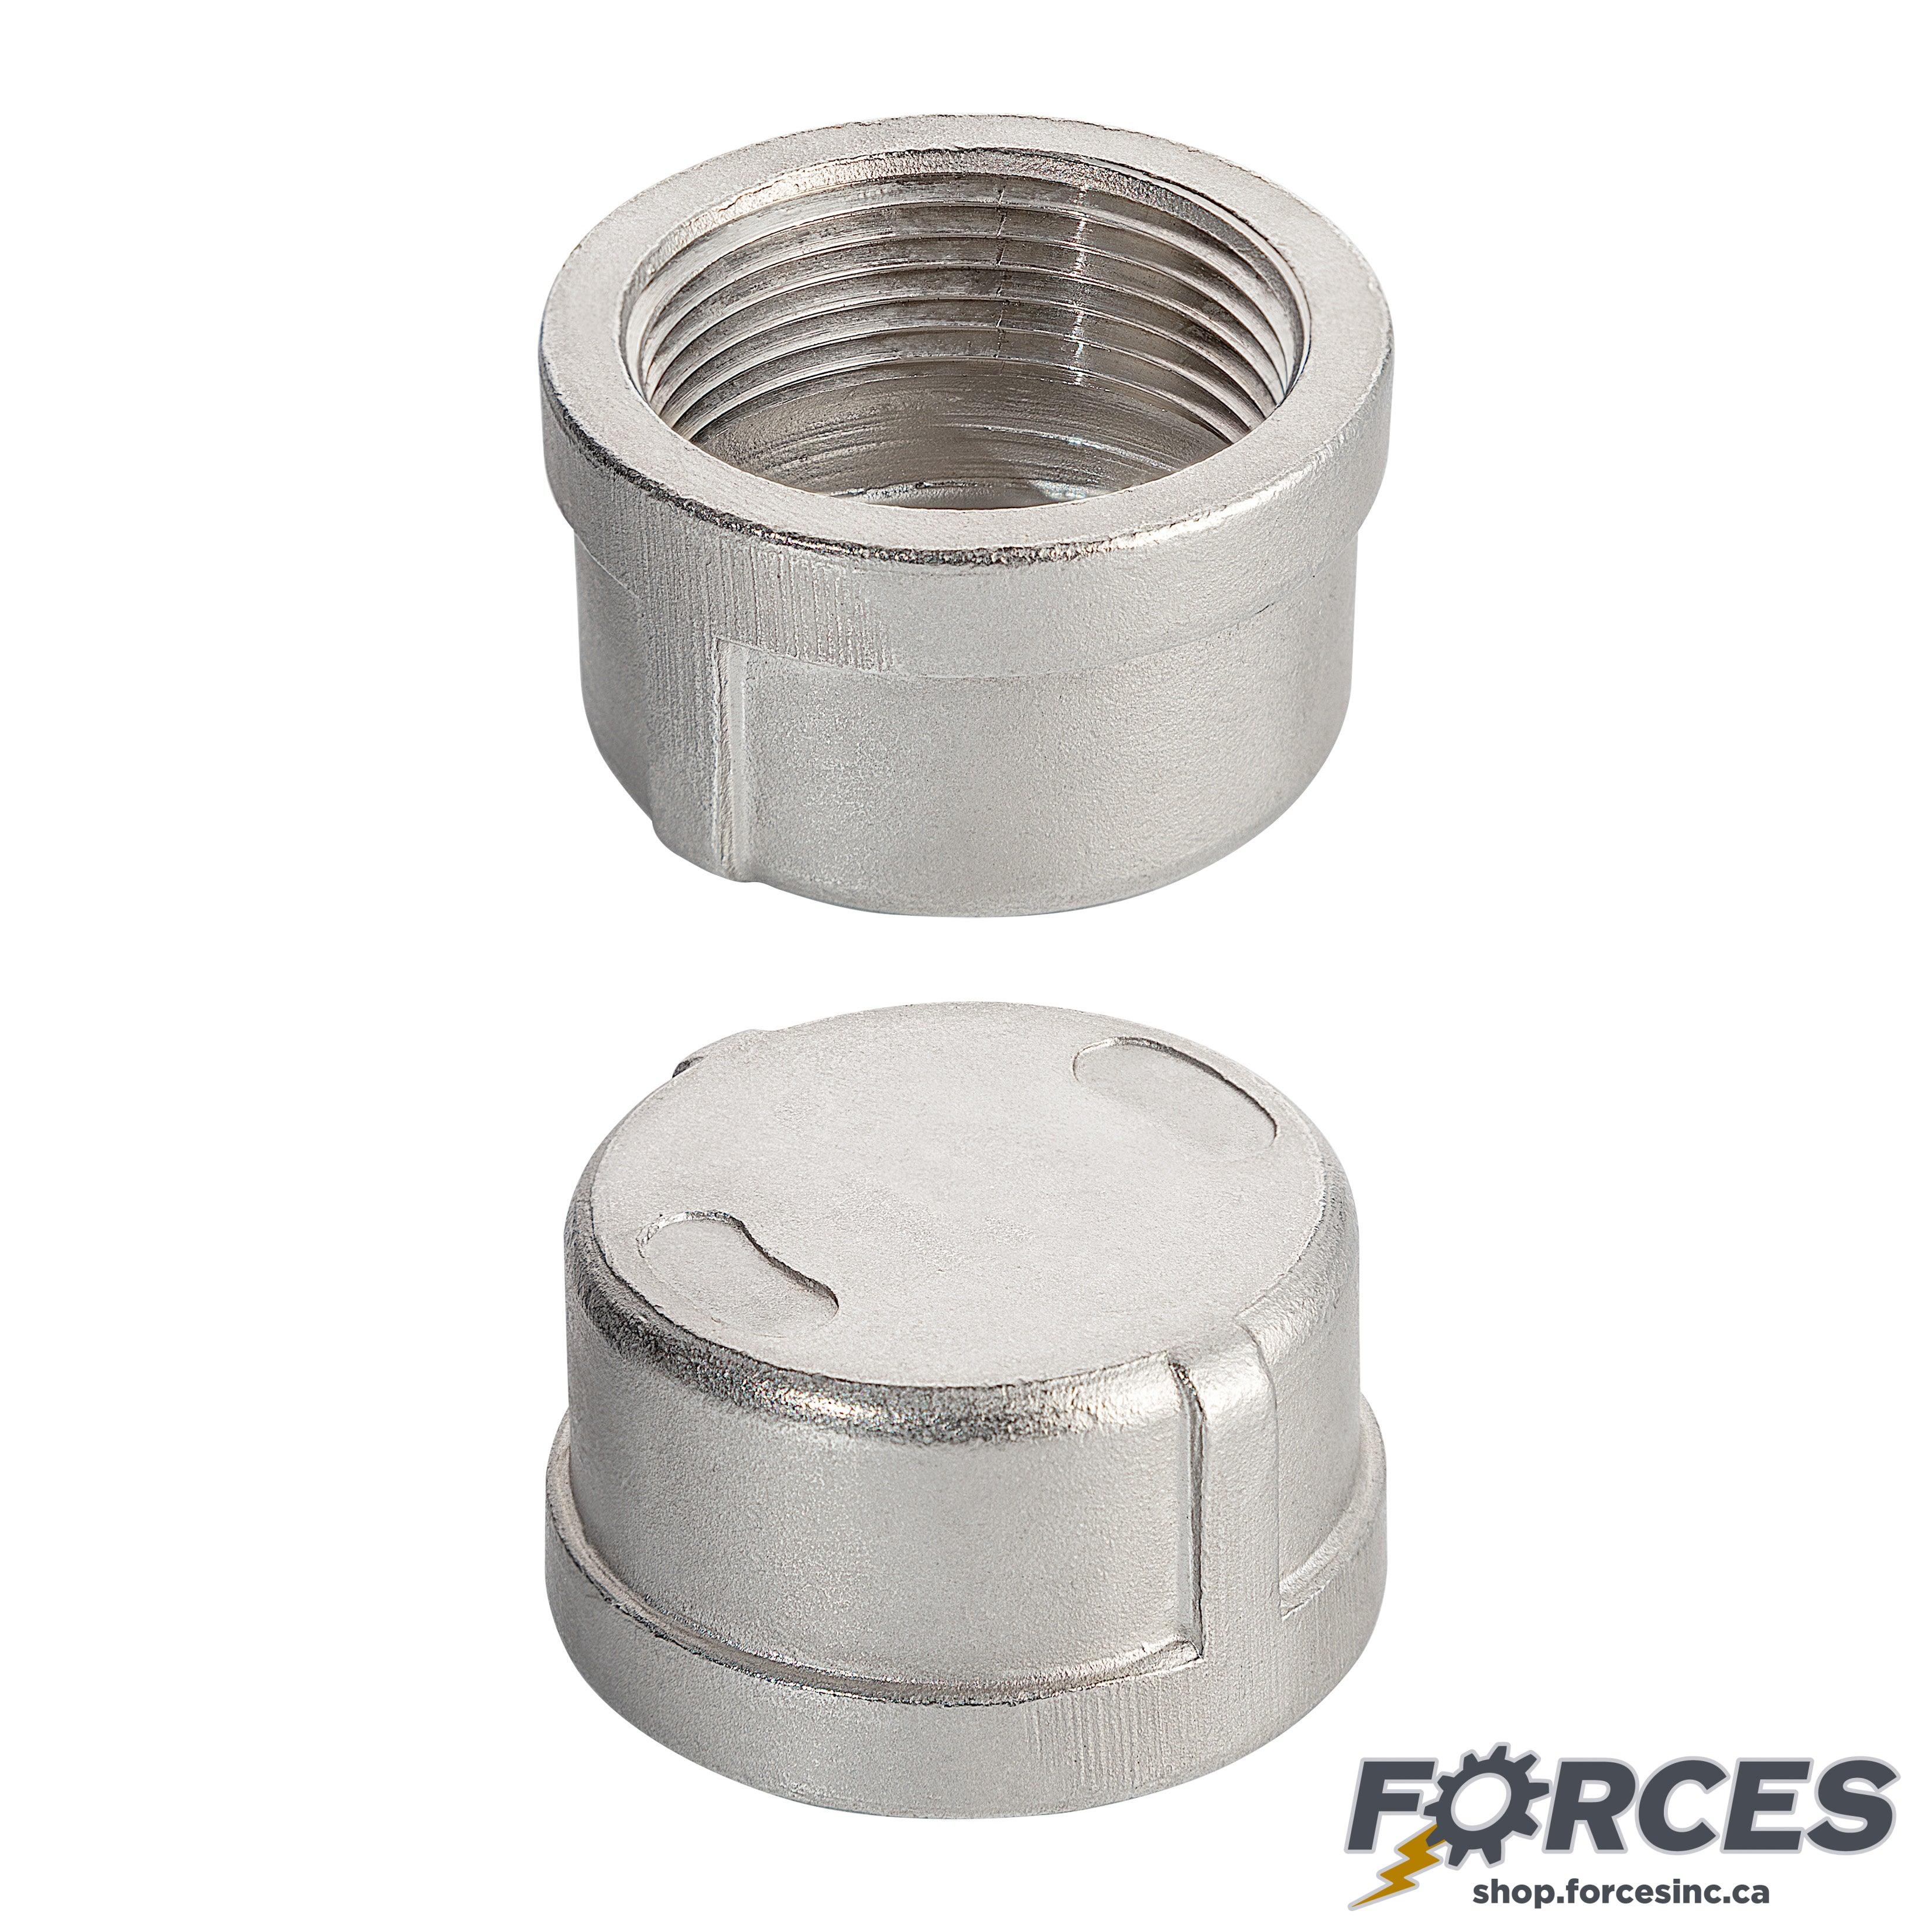 1-1/4" Cap NPT #150 - Stainless Steel 316 - Forces Inc